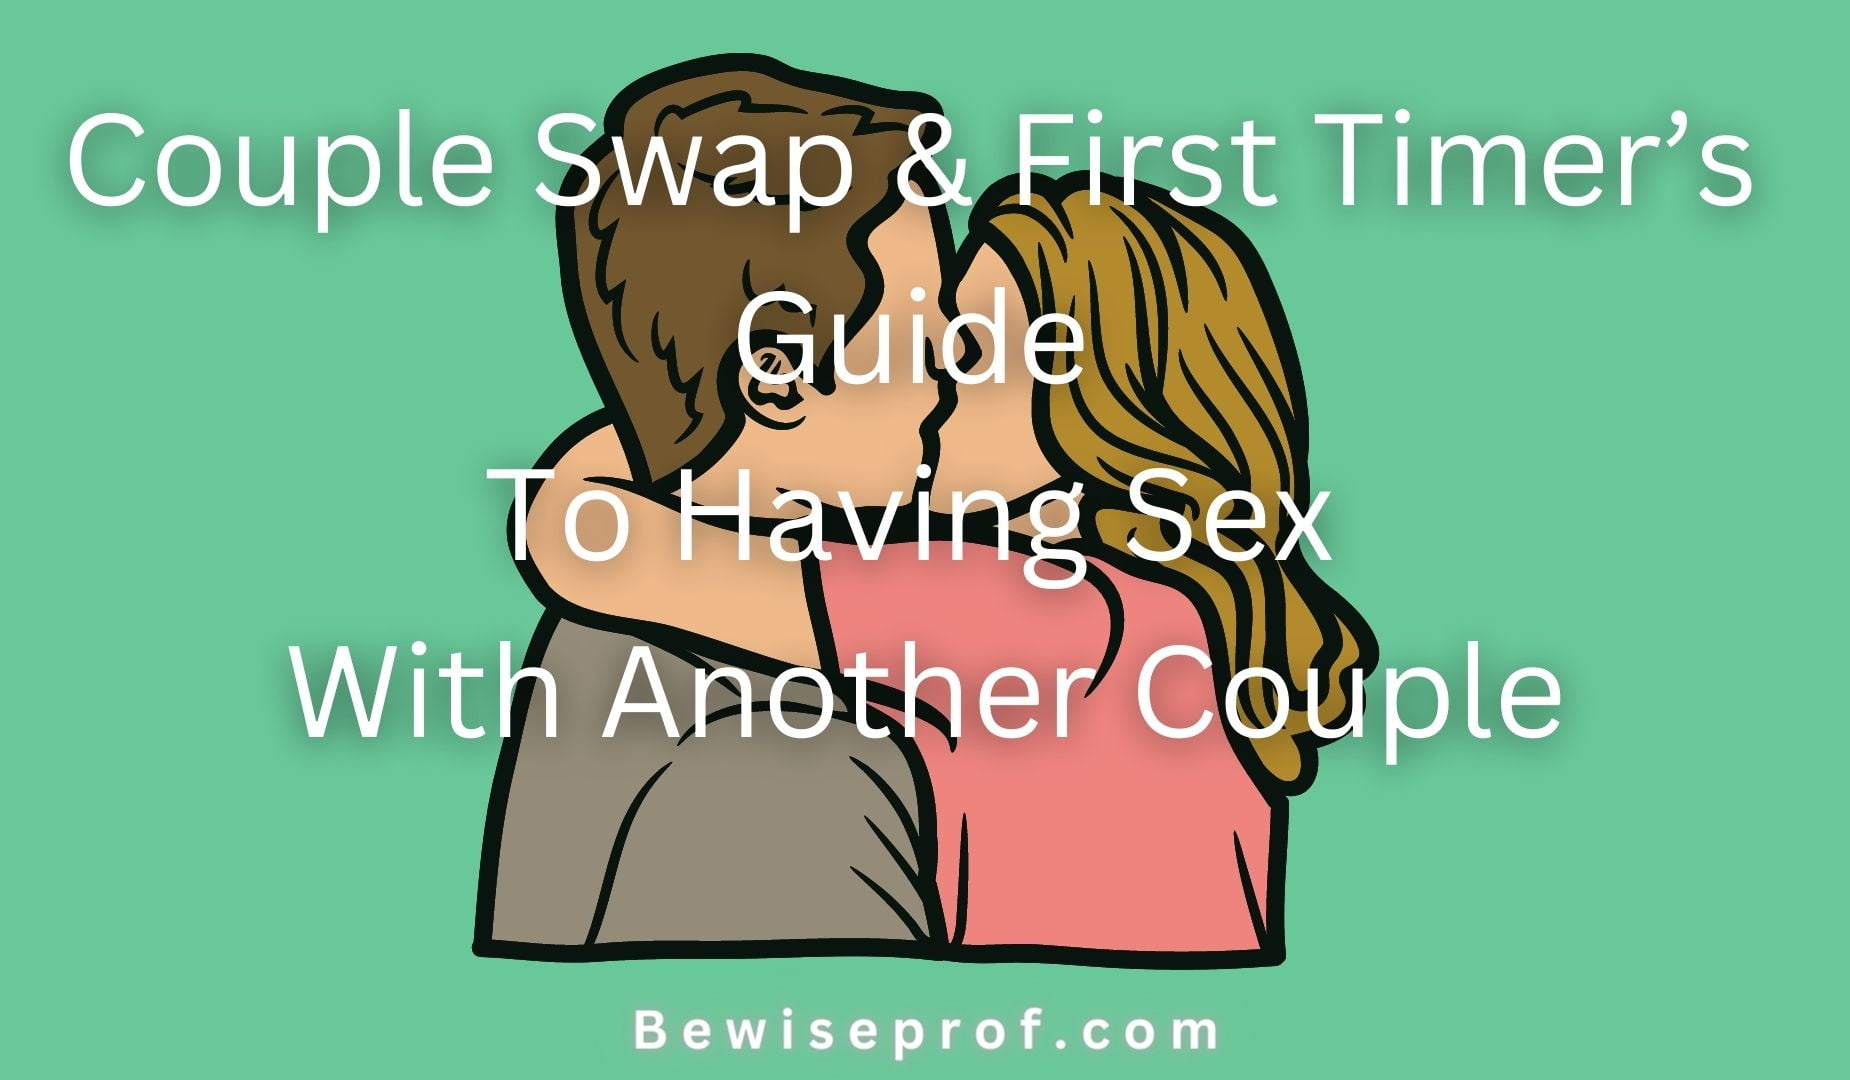 Couple Swap & First Timer’s Guide To Having Sex With Another Couple